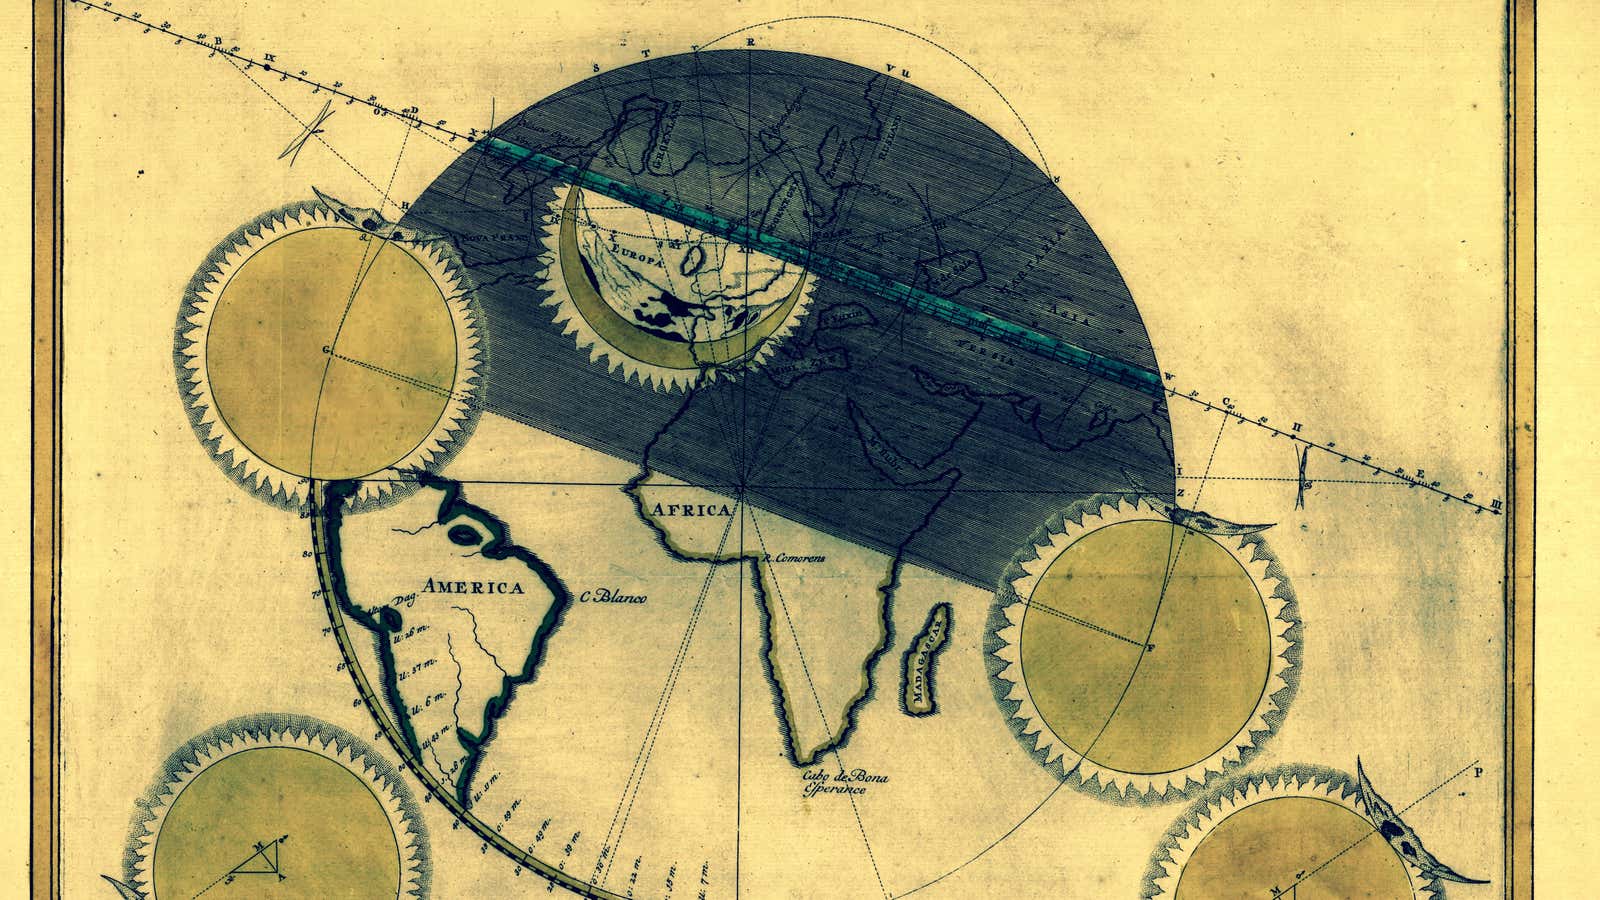 July 25, 1748 eclipse map by Simon Panser.